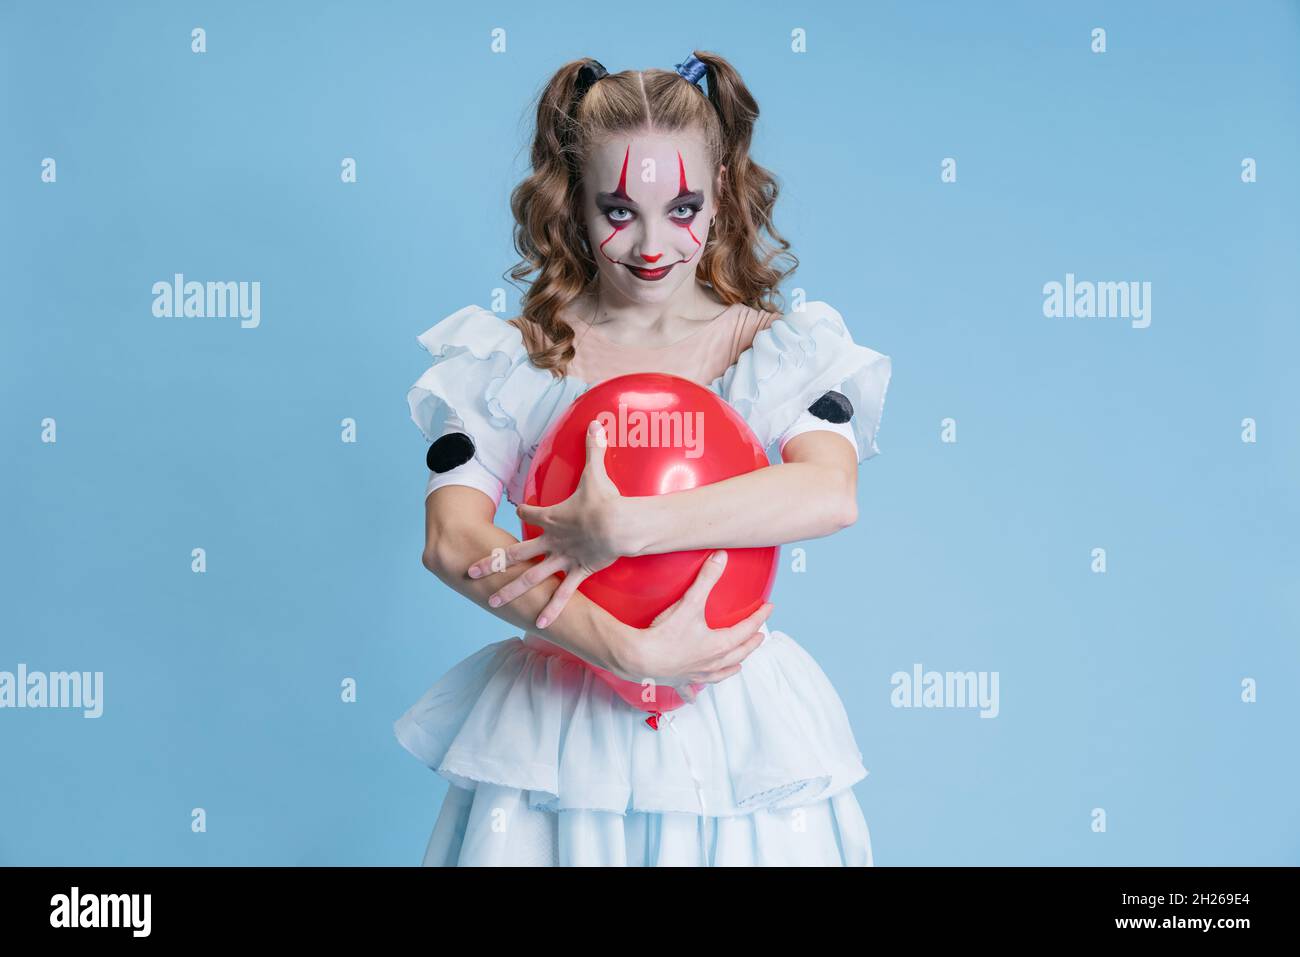 Conceptual portrait of charming young girl in Halloween costume of movie character with spooky facial expression isolated over blue background Stock Photo